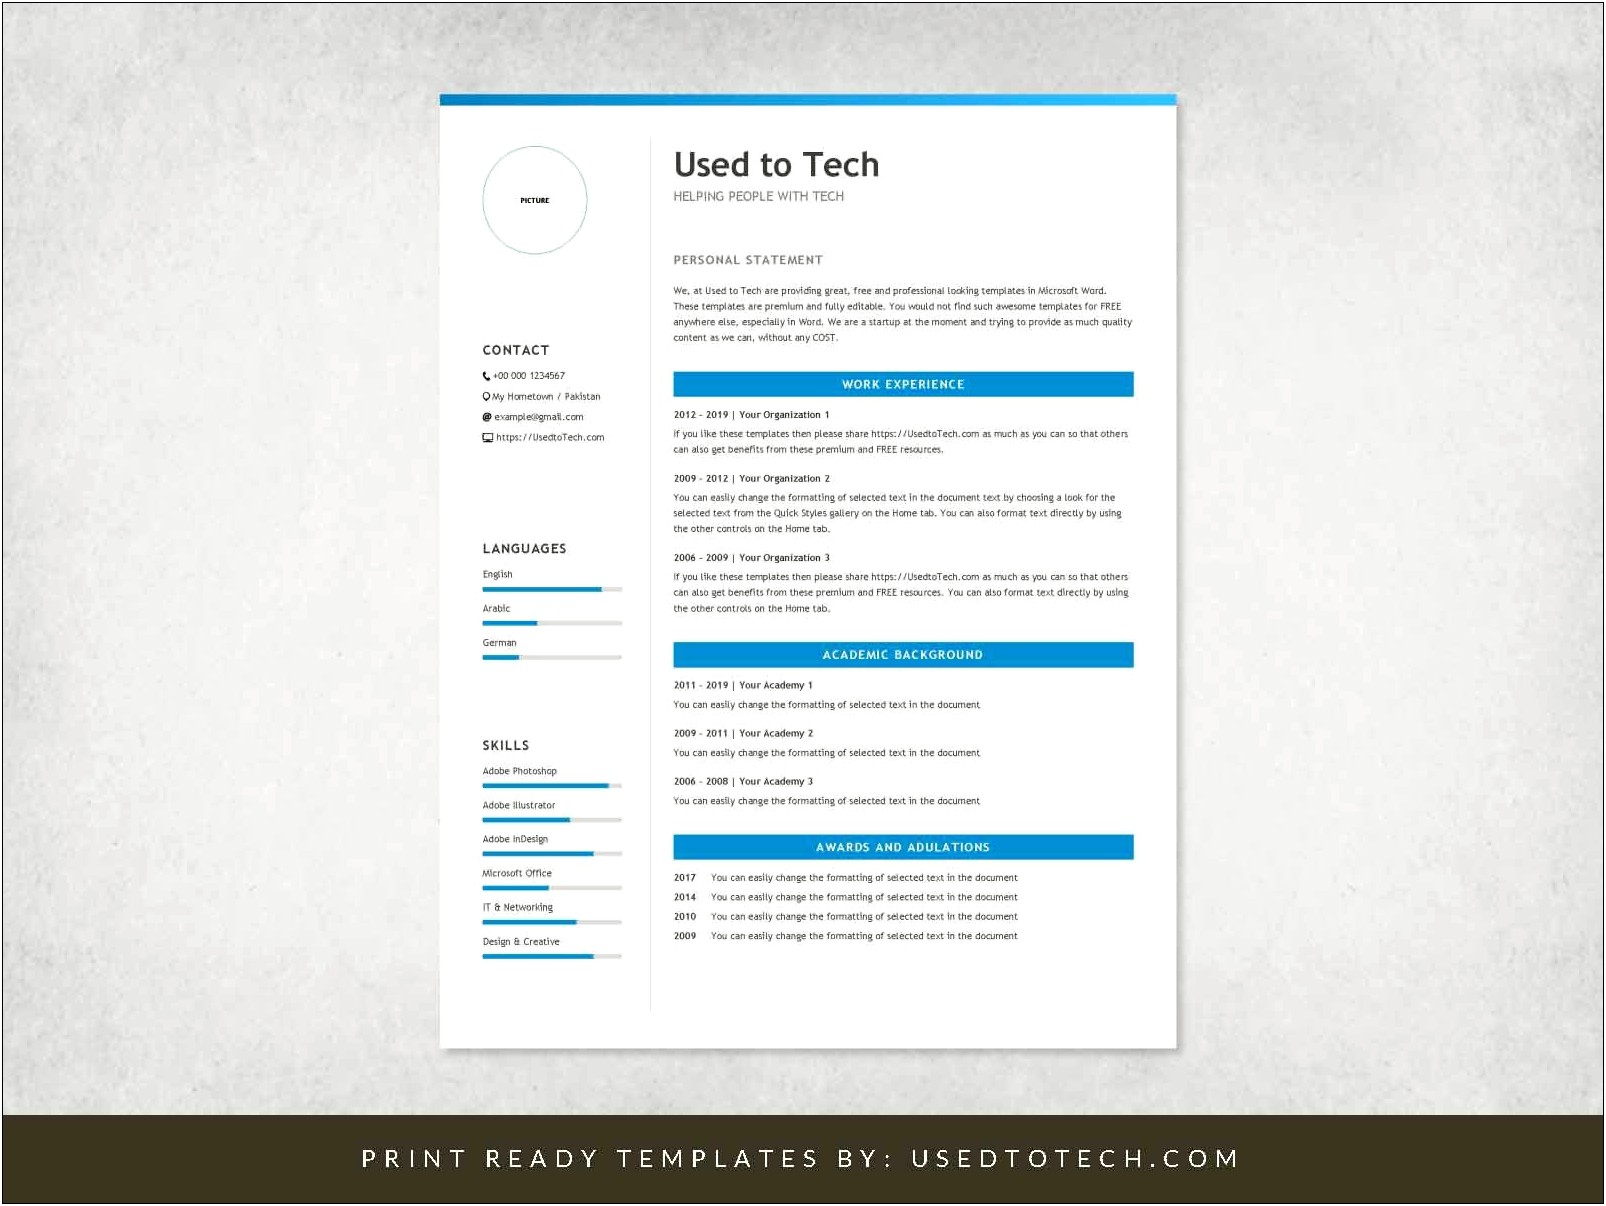 Microsoft Word Resume Template Replace Photo